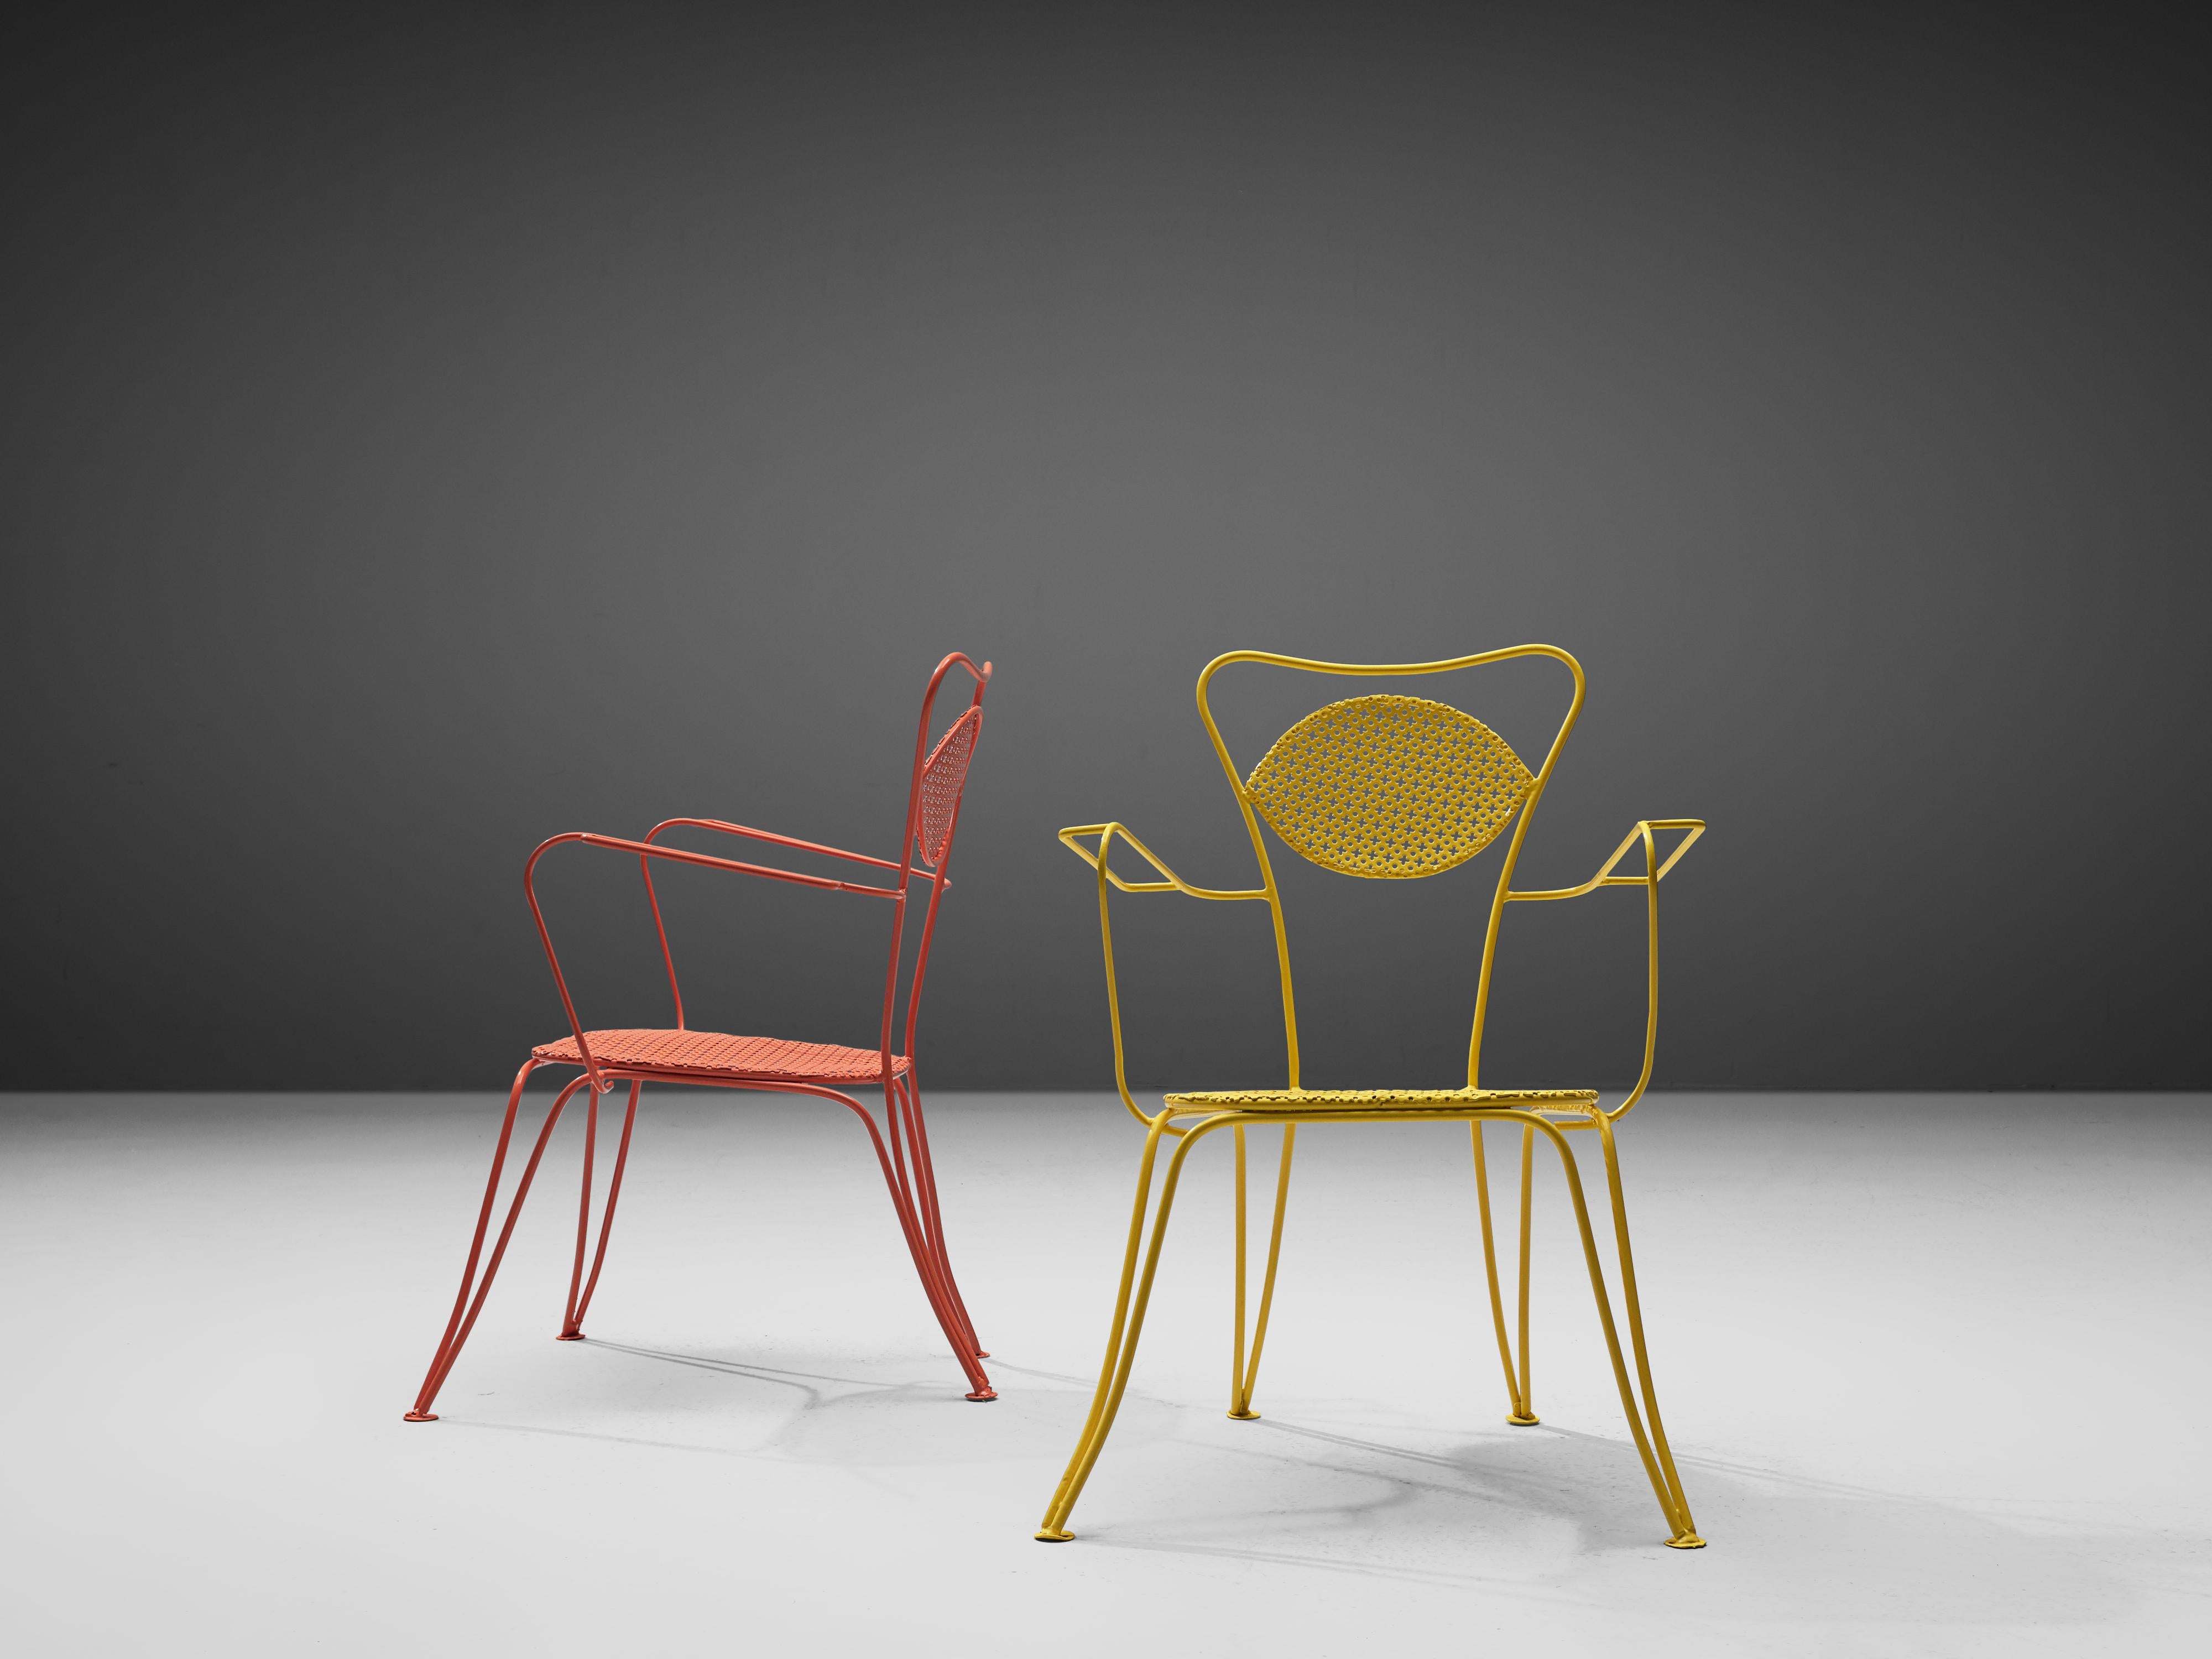 colourful outdoor chairs